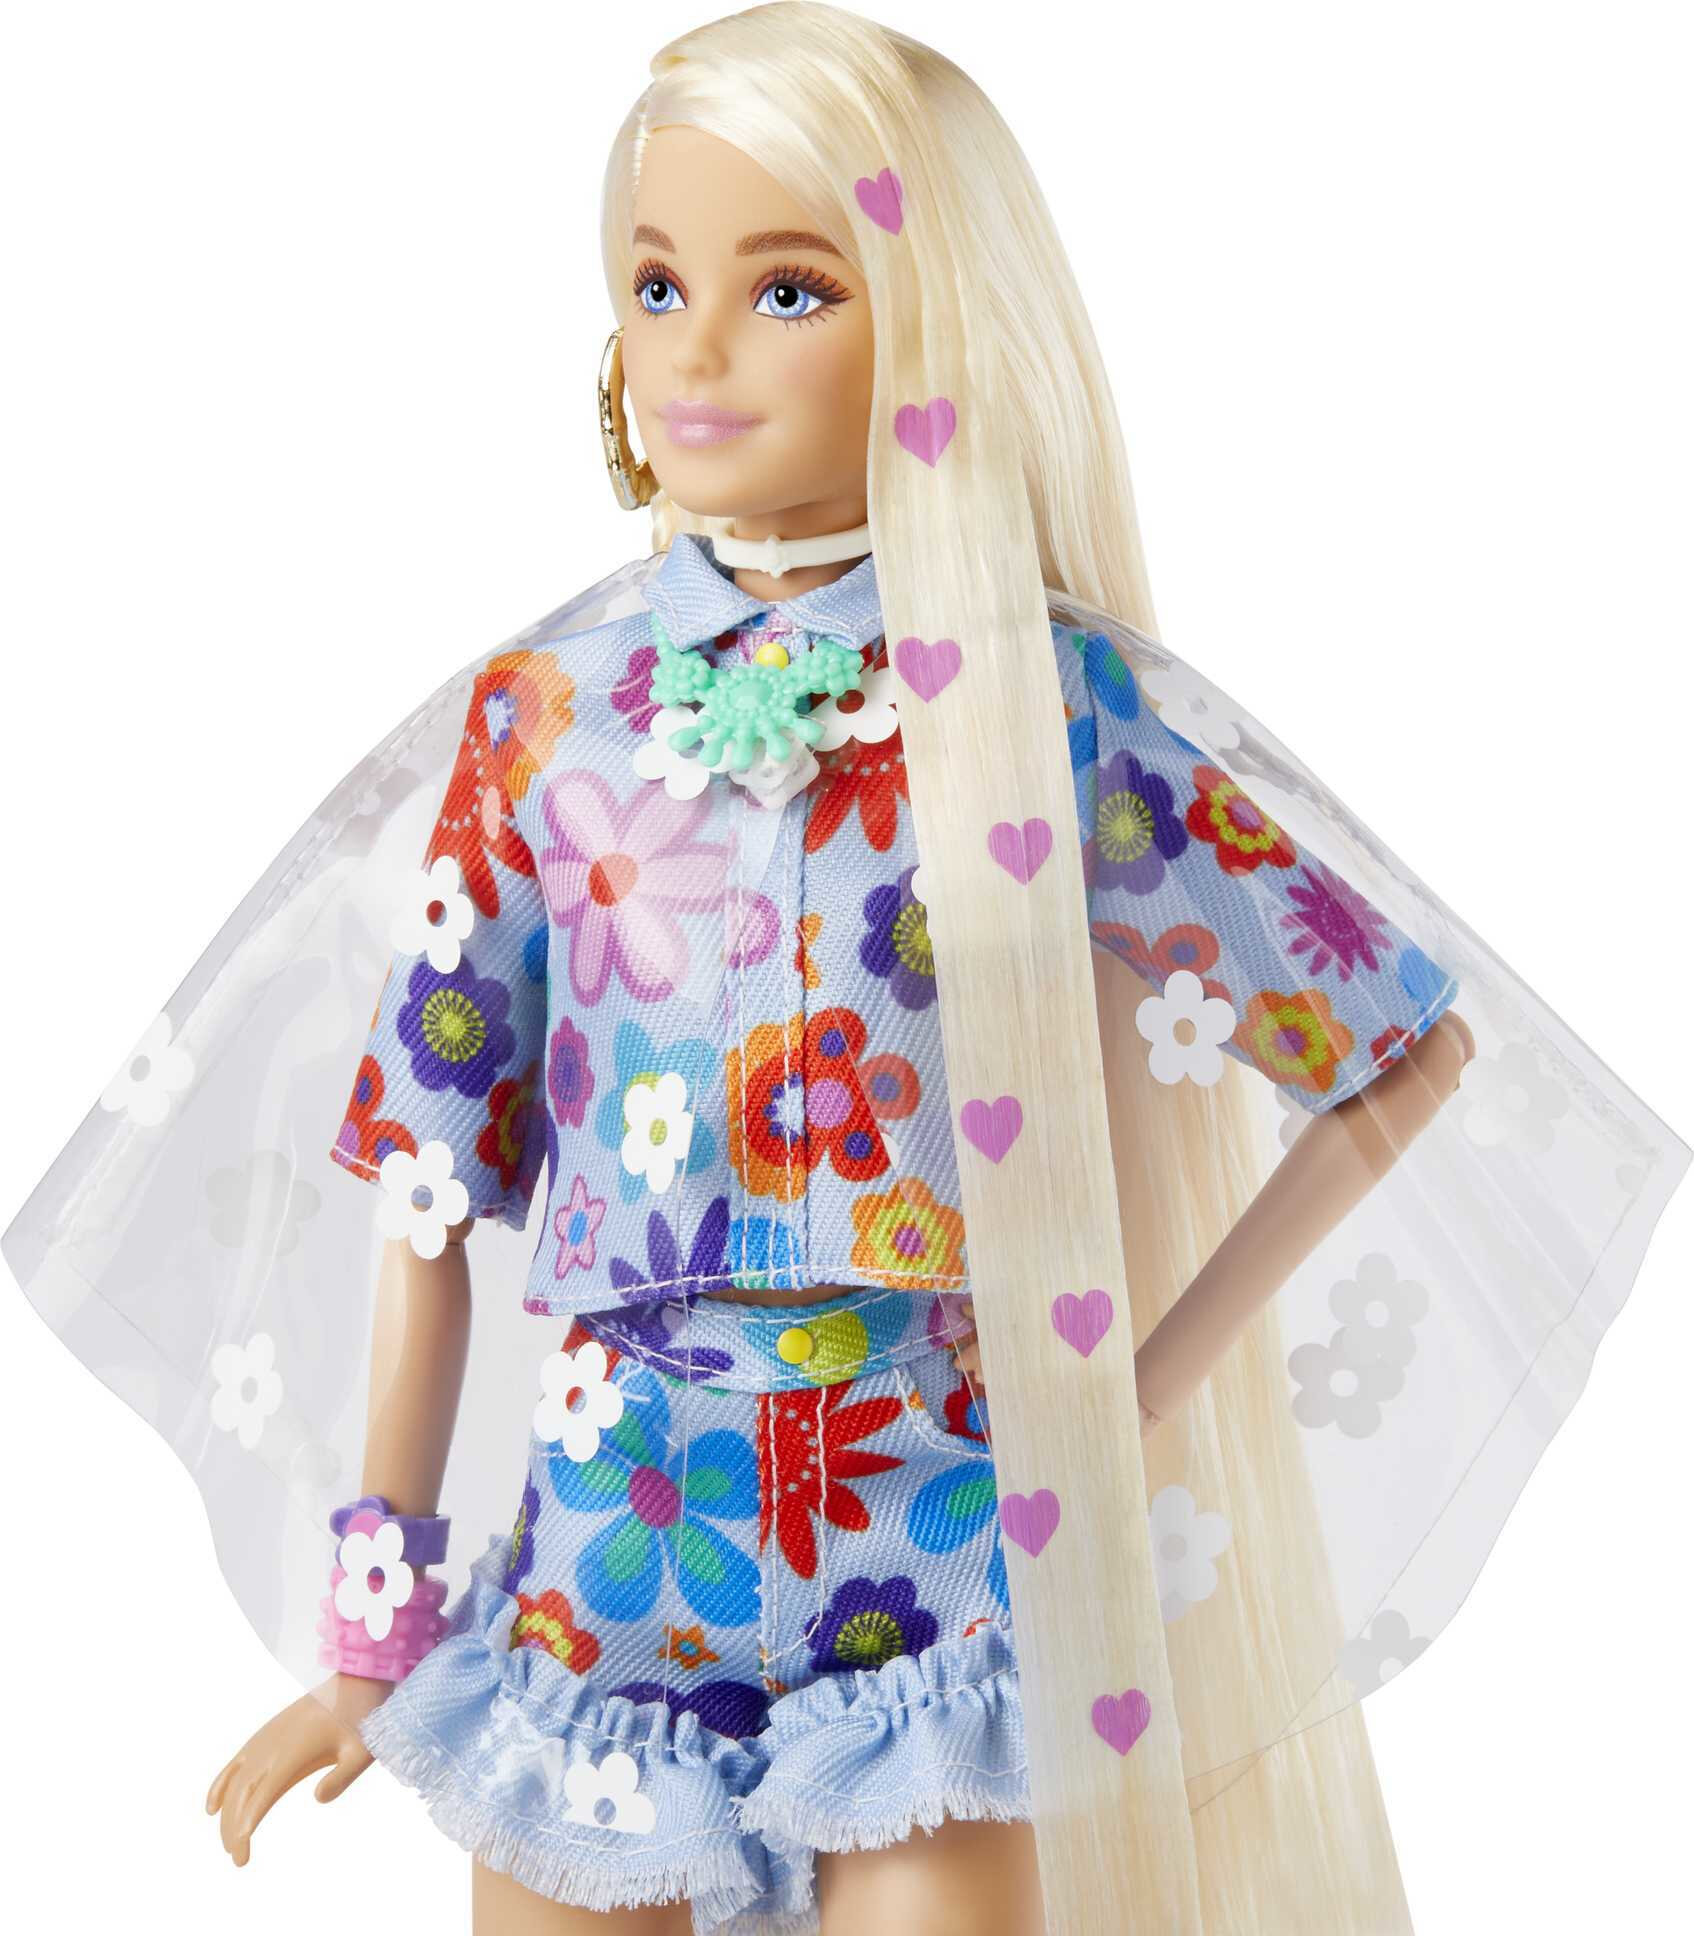 Barbie Extra Fashion Doll with Blonde Hair Dressed in Floral 2-Piece Outfit with Accessories & Pet - image 4 of 8